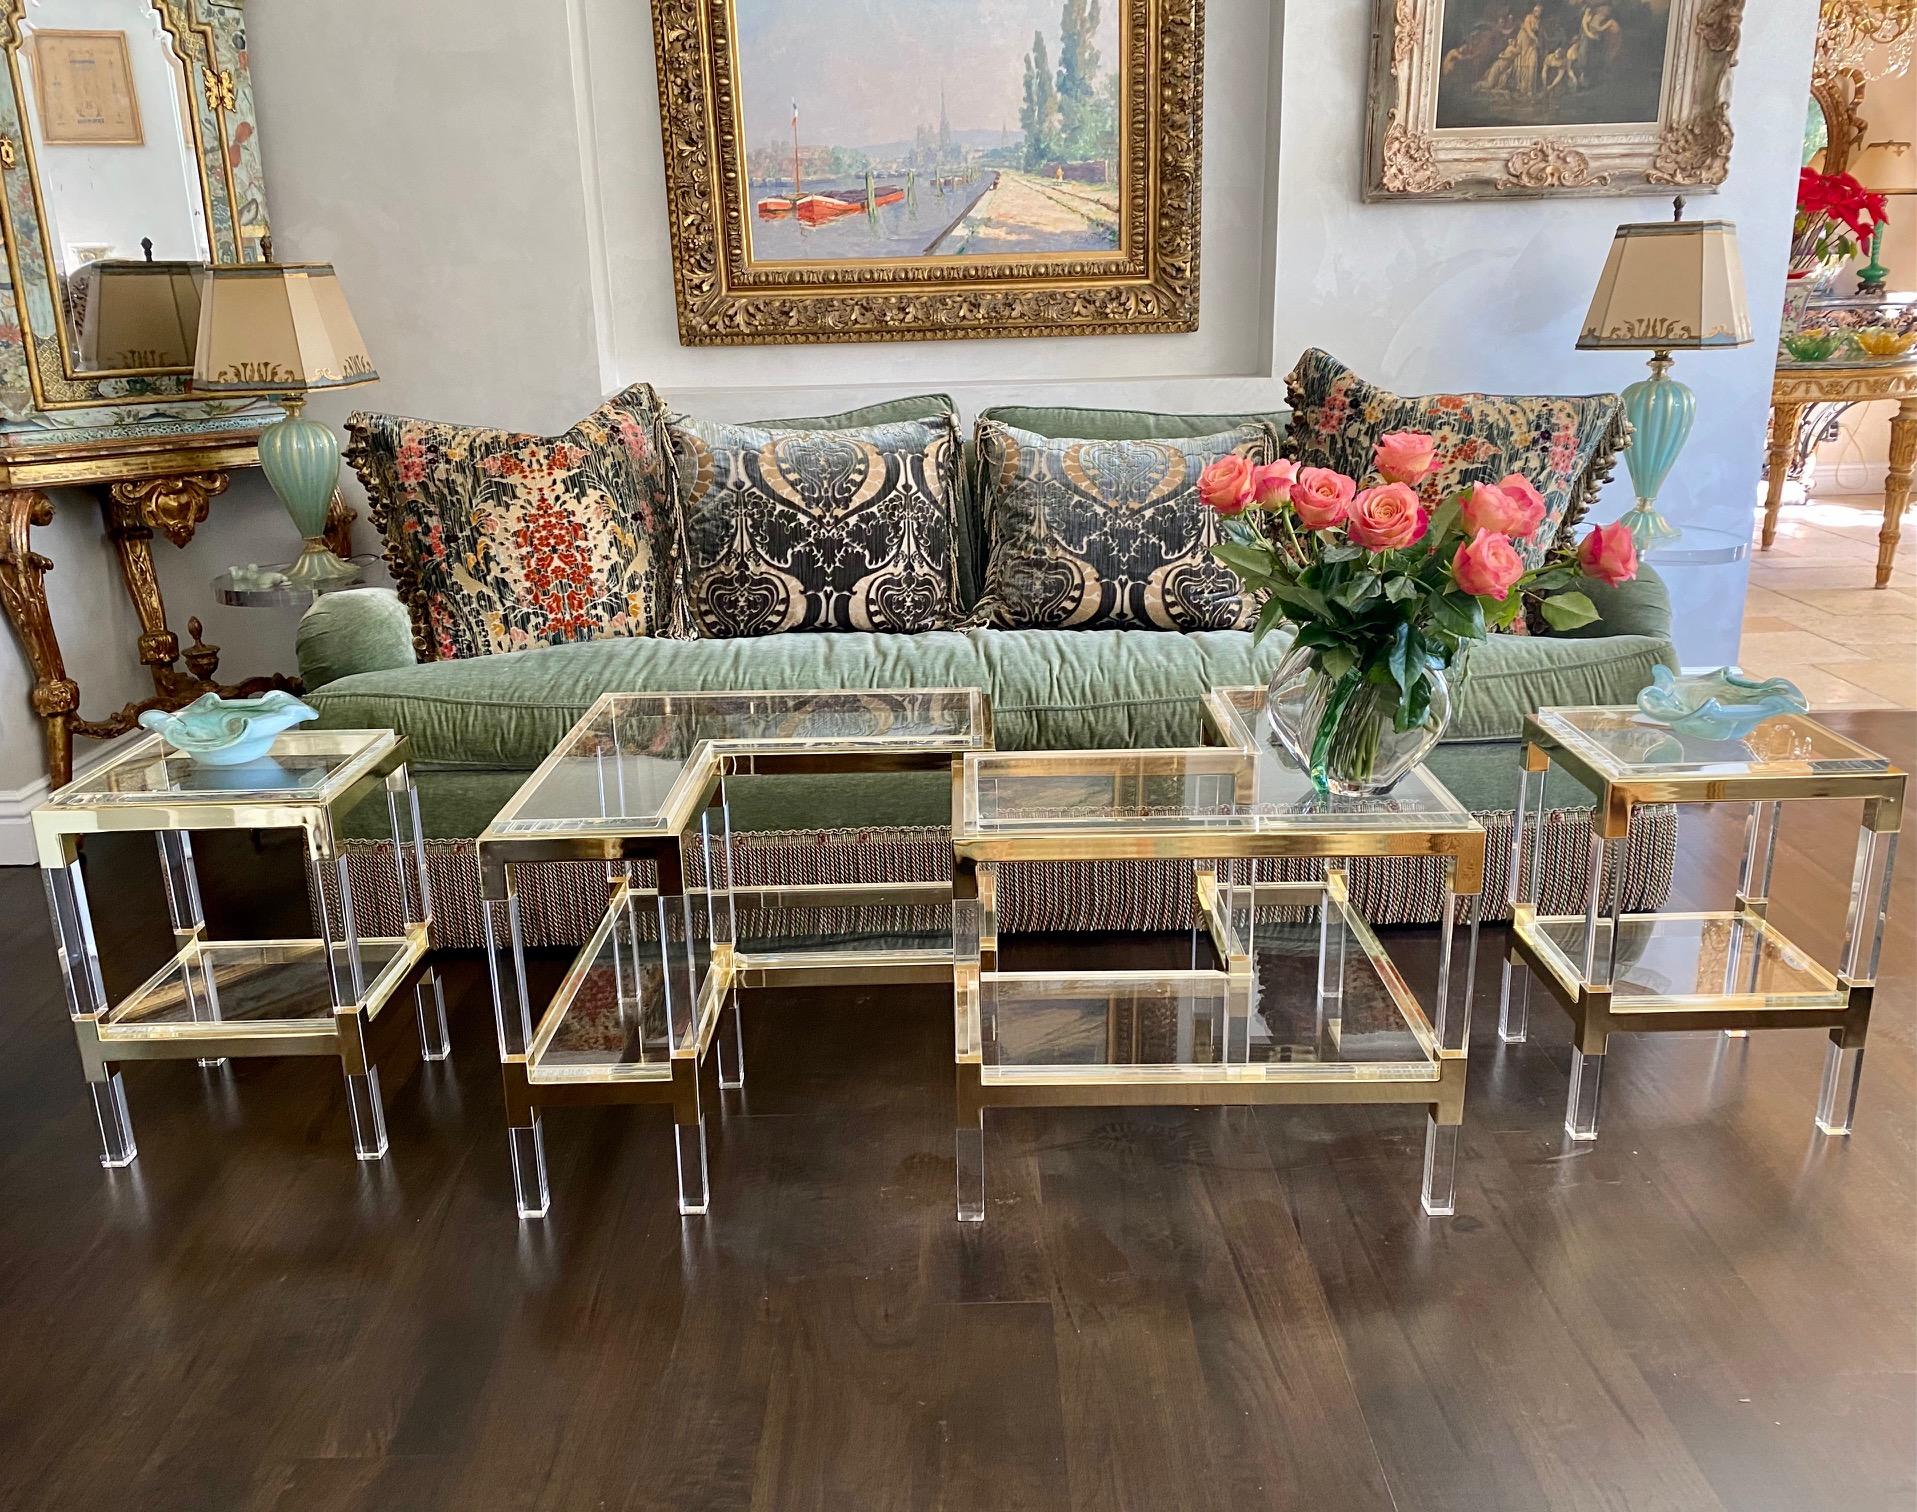 Rare brass plated and lucite pair of side tables or can be used as coffee table 2019 Charles Hollis Jones
(Second set ever made by CHJ)
Provenance private collection of CHJ

The Connexion double square end table is part of the Connexion